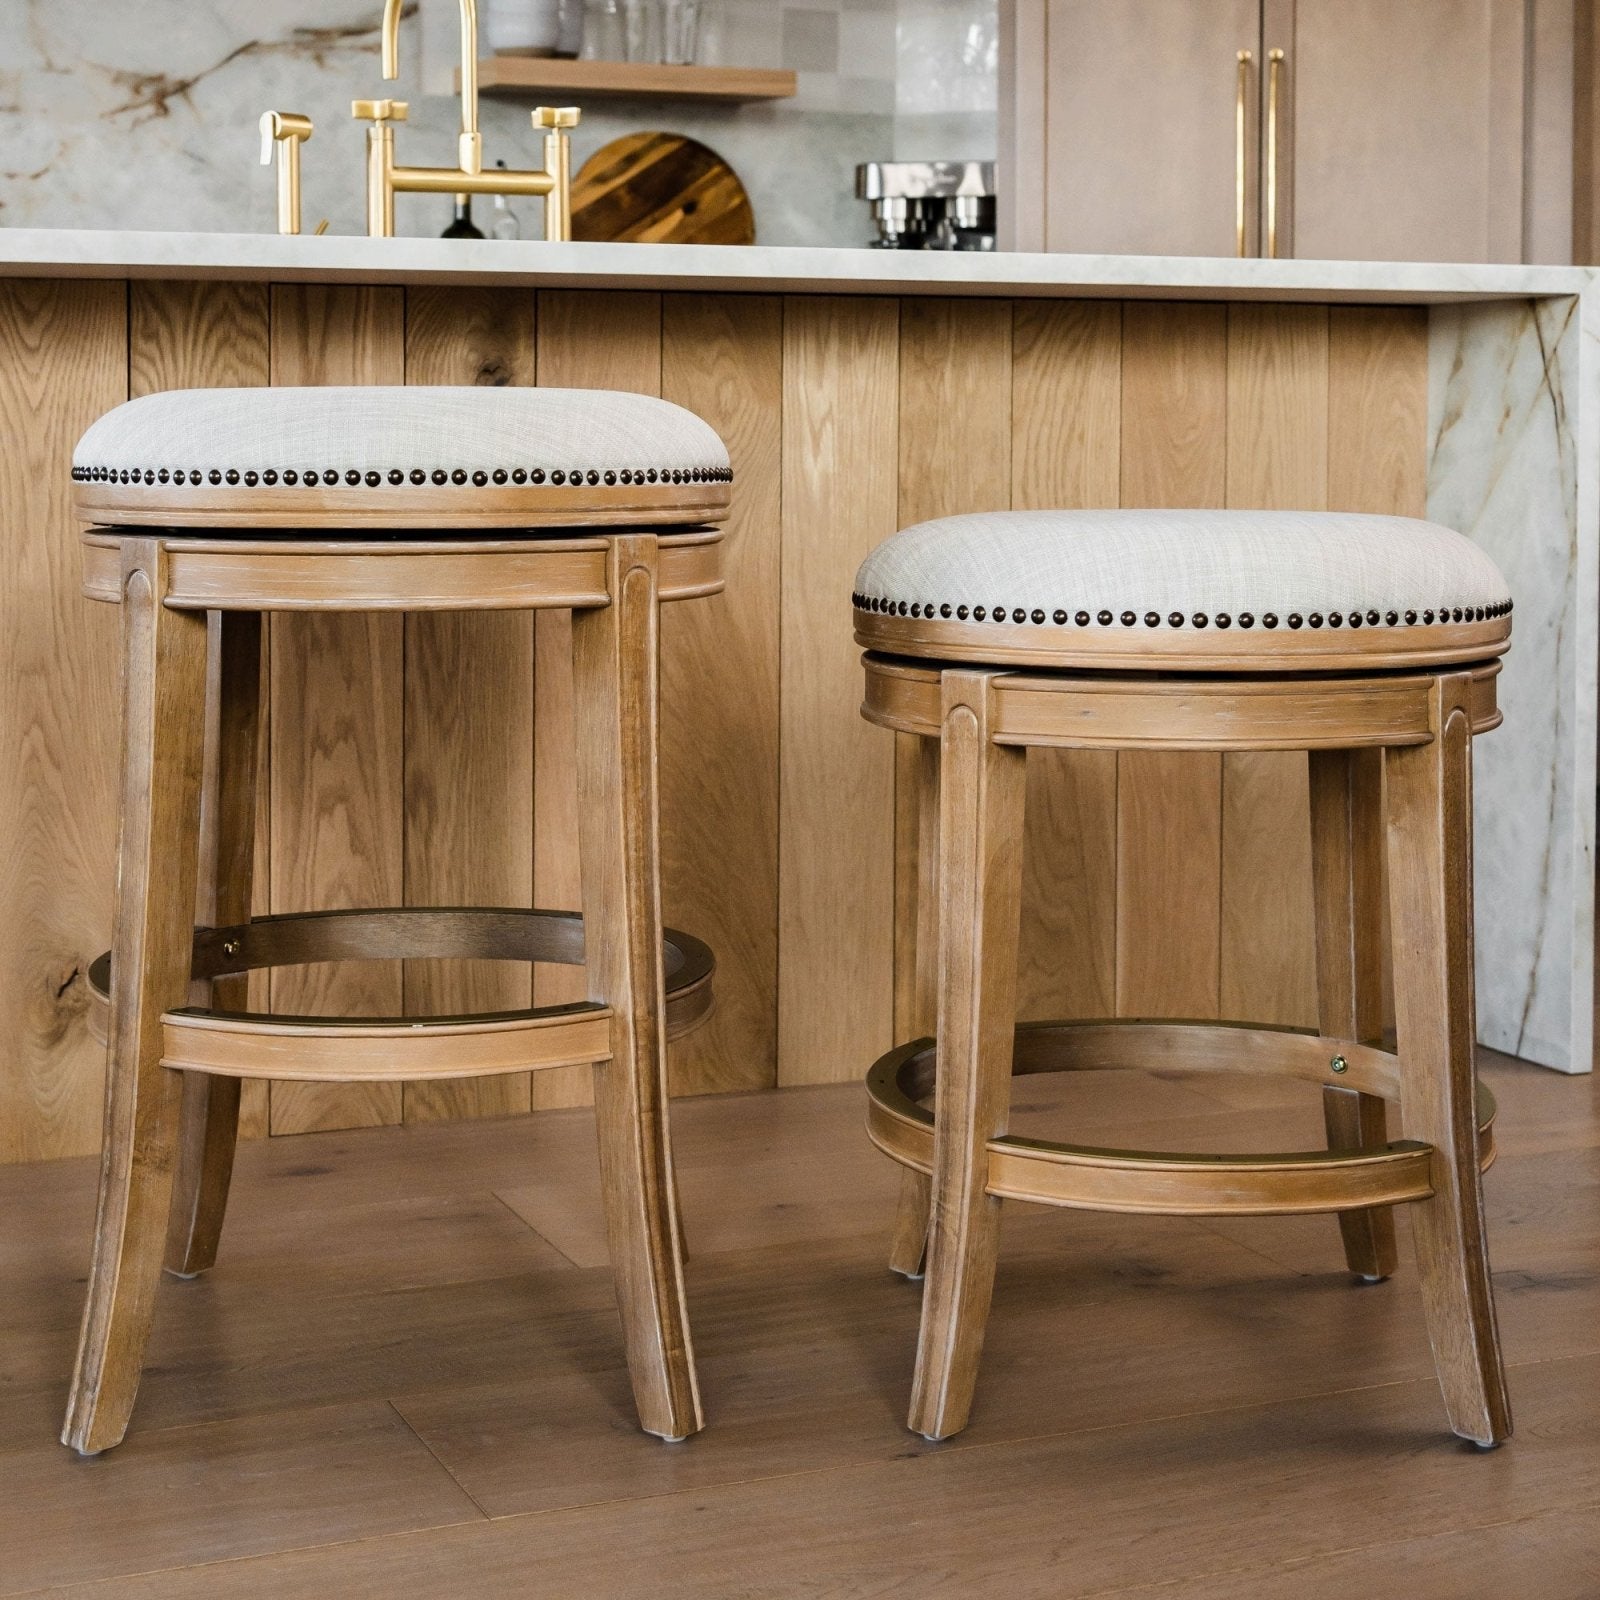 Alexander Backless Counter Stool in Weathered Oak Finish with Sand Color Fabric Upholstery in Stools by Maven Lane